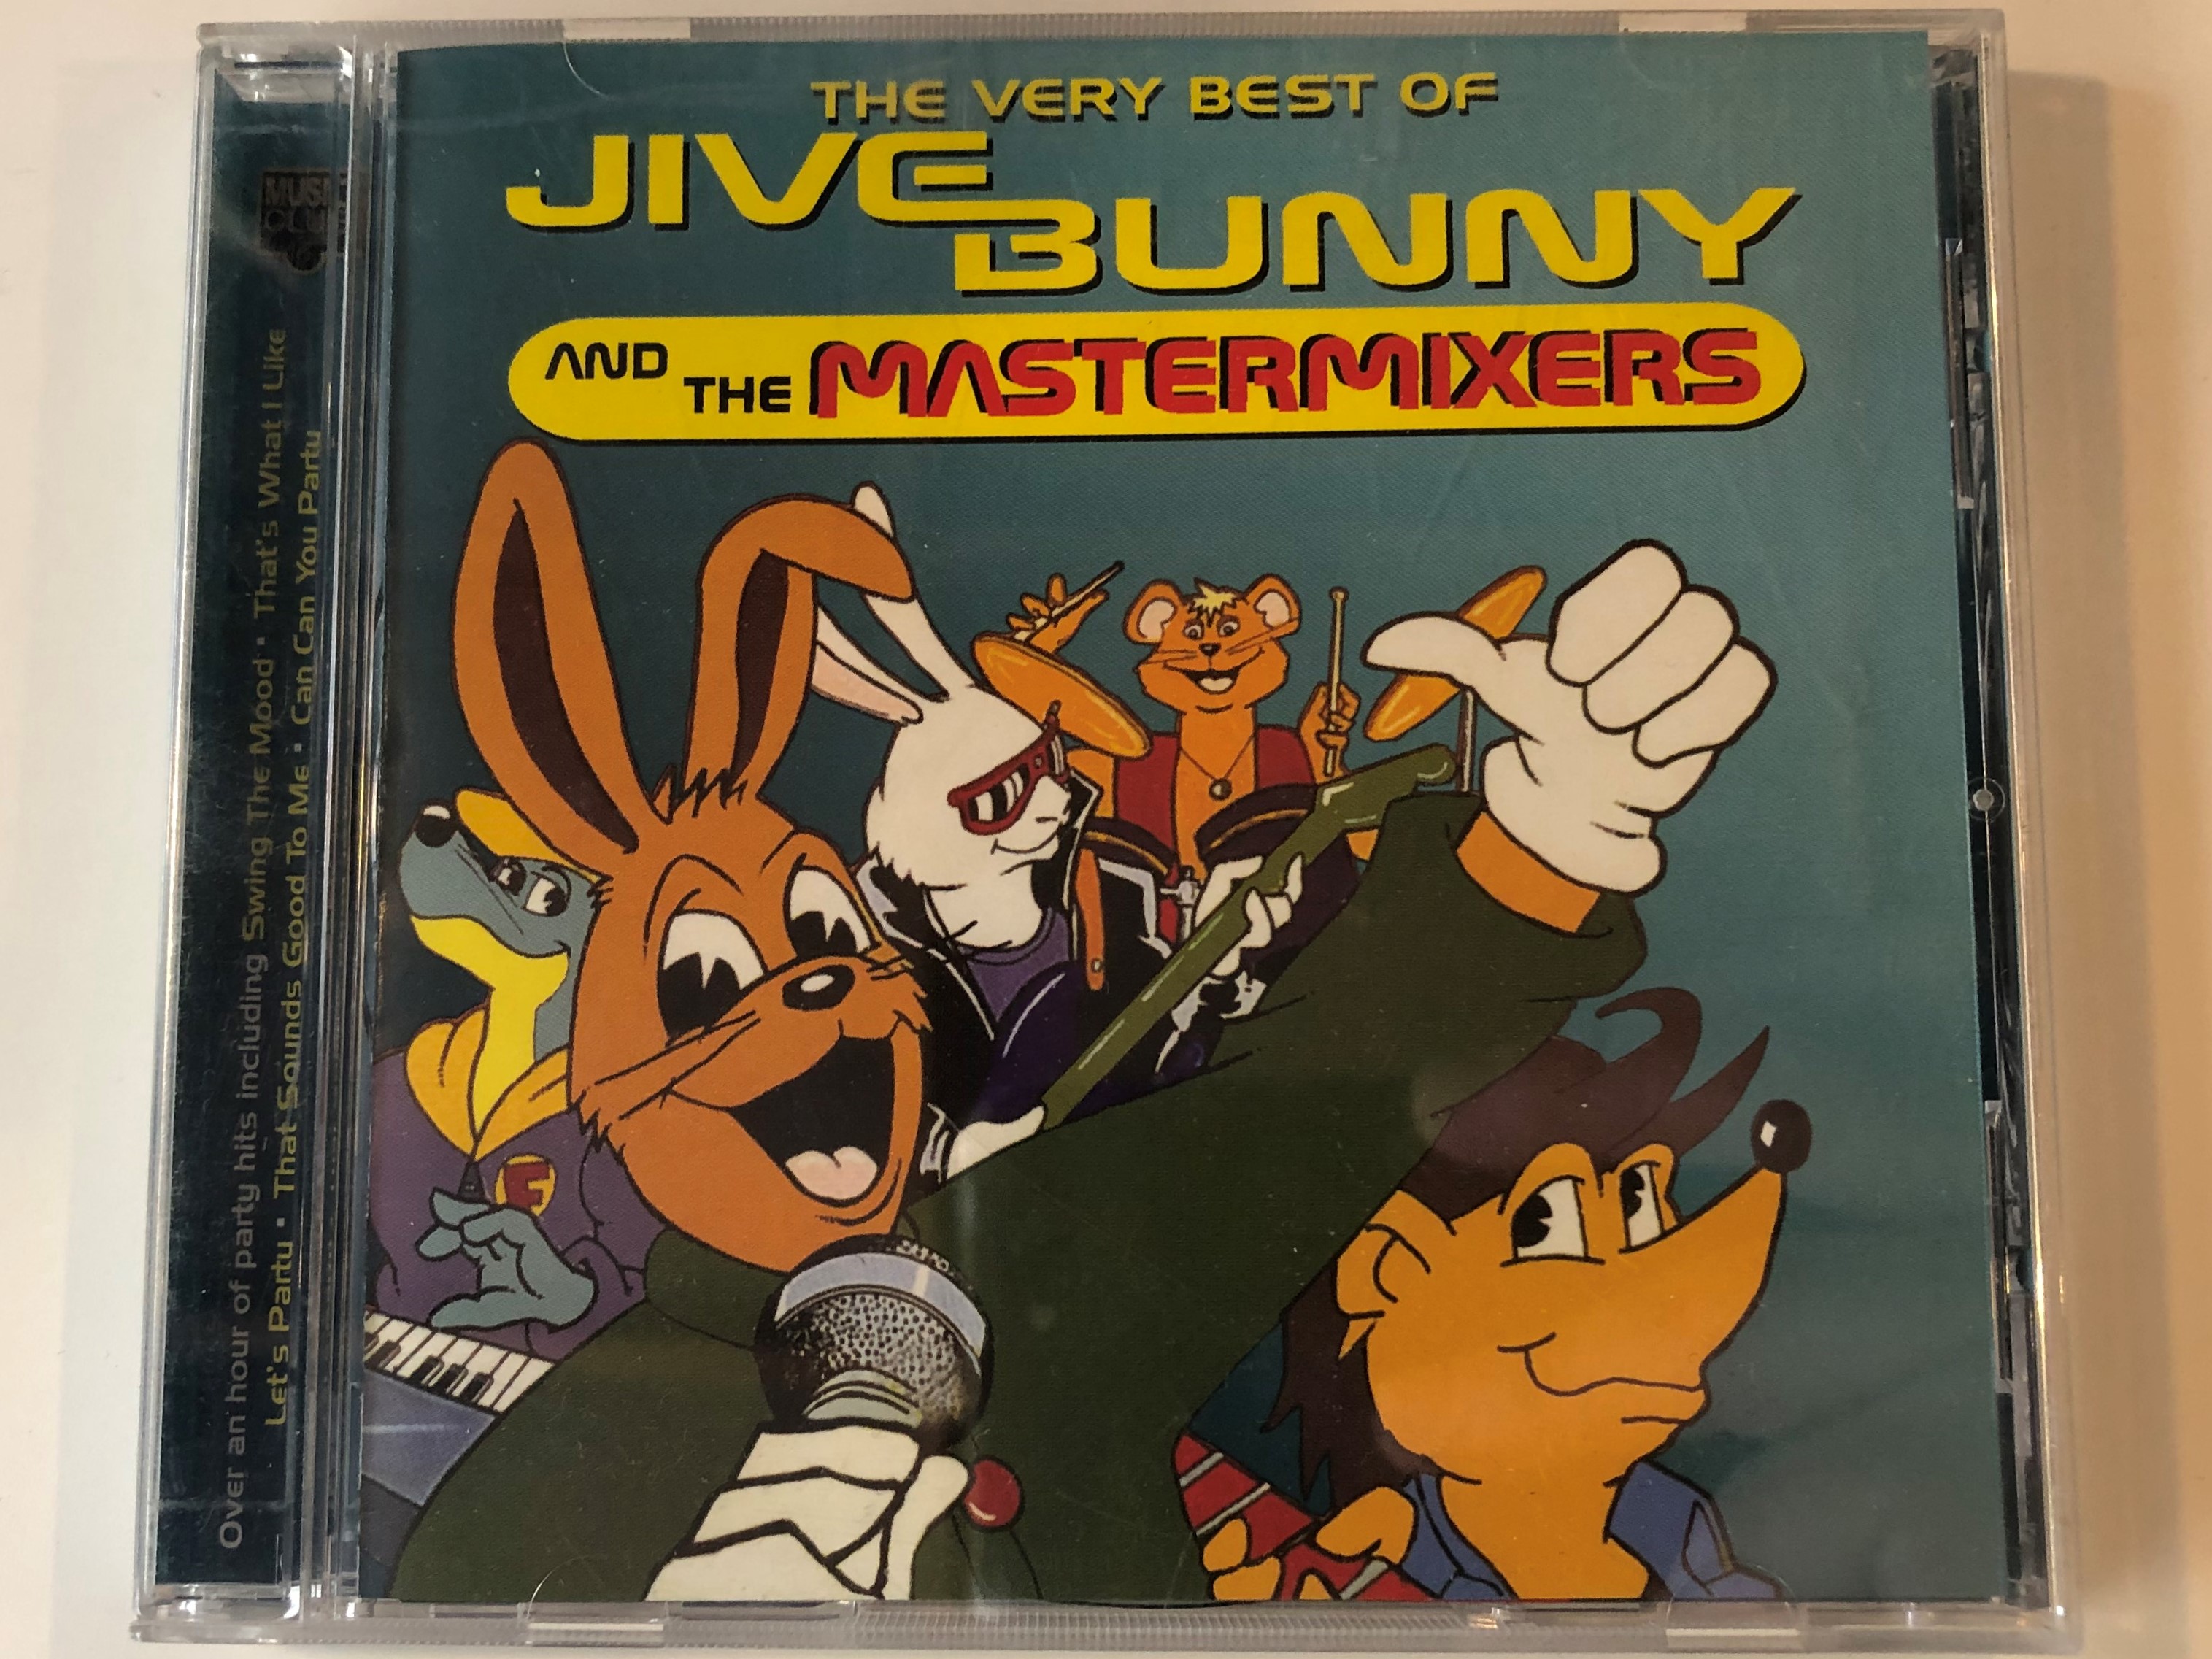 The Very Best Of Jive Bunny And The Mastermixers ‎/ Over an hour of party  hits including: Swing The Mood, That´s What I Like, Let´s Party, That  Sounds Good To Me, Can